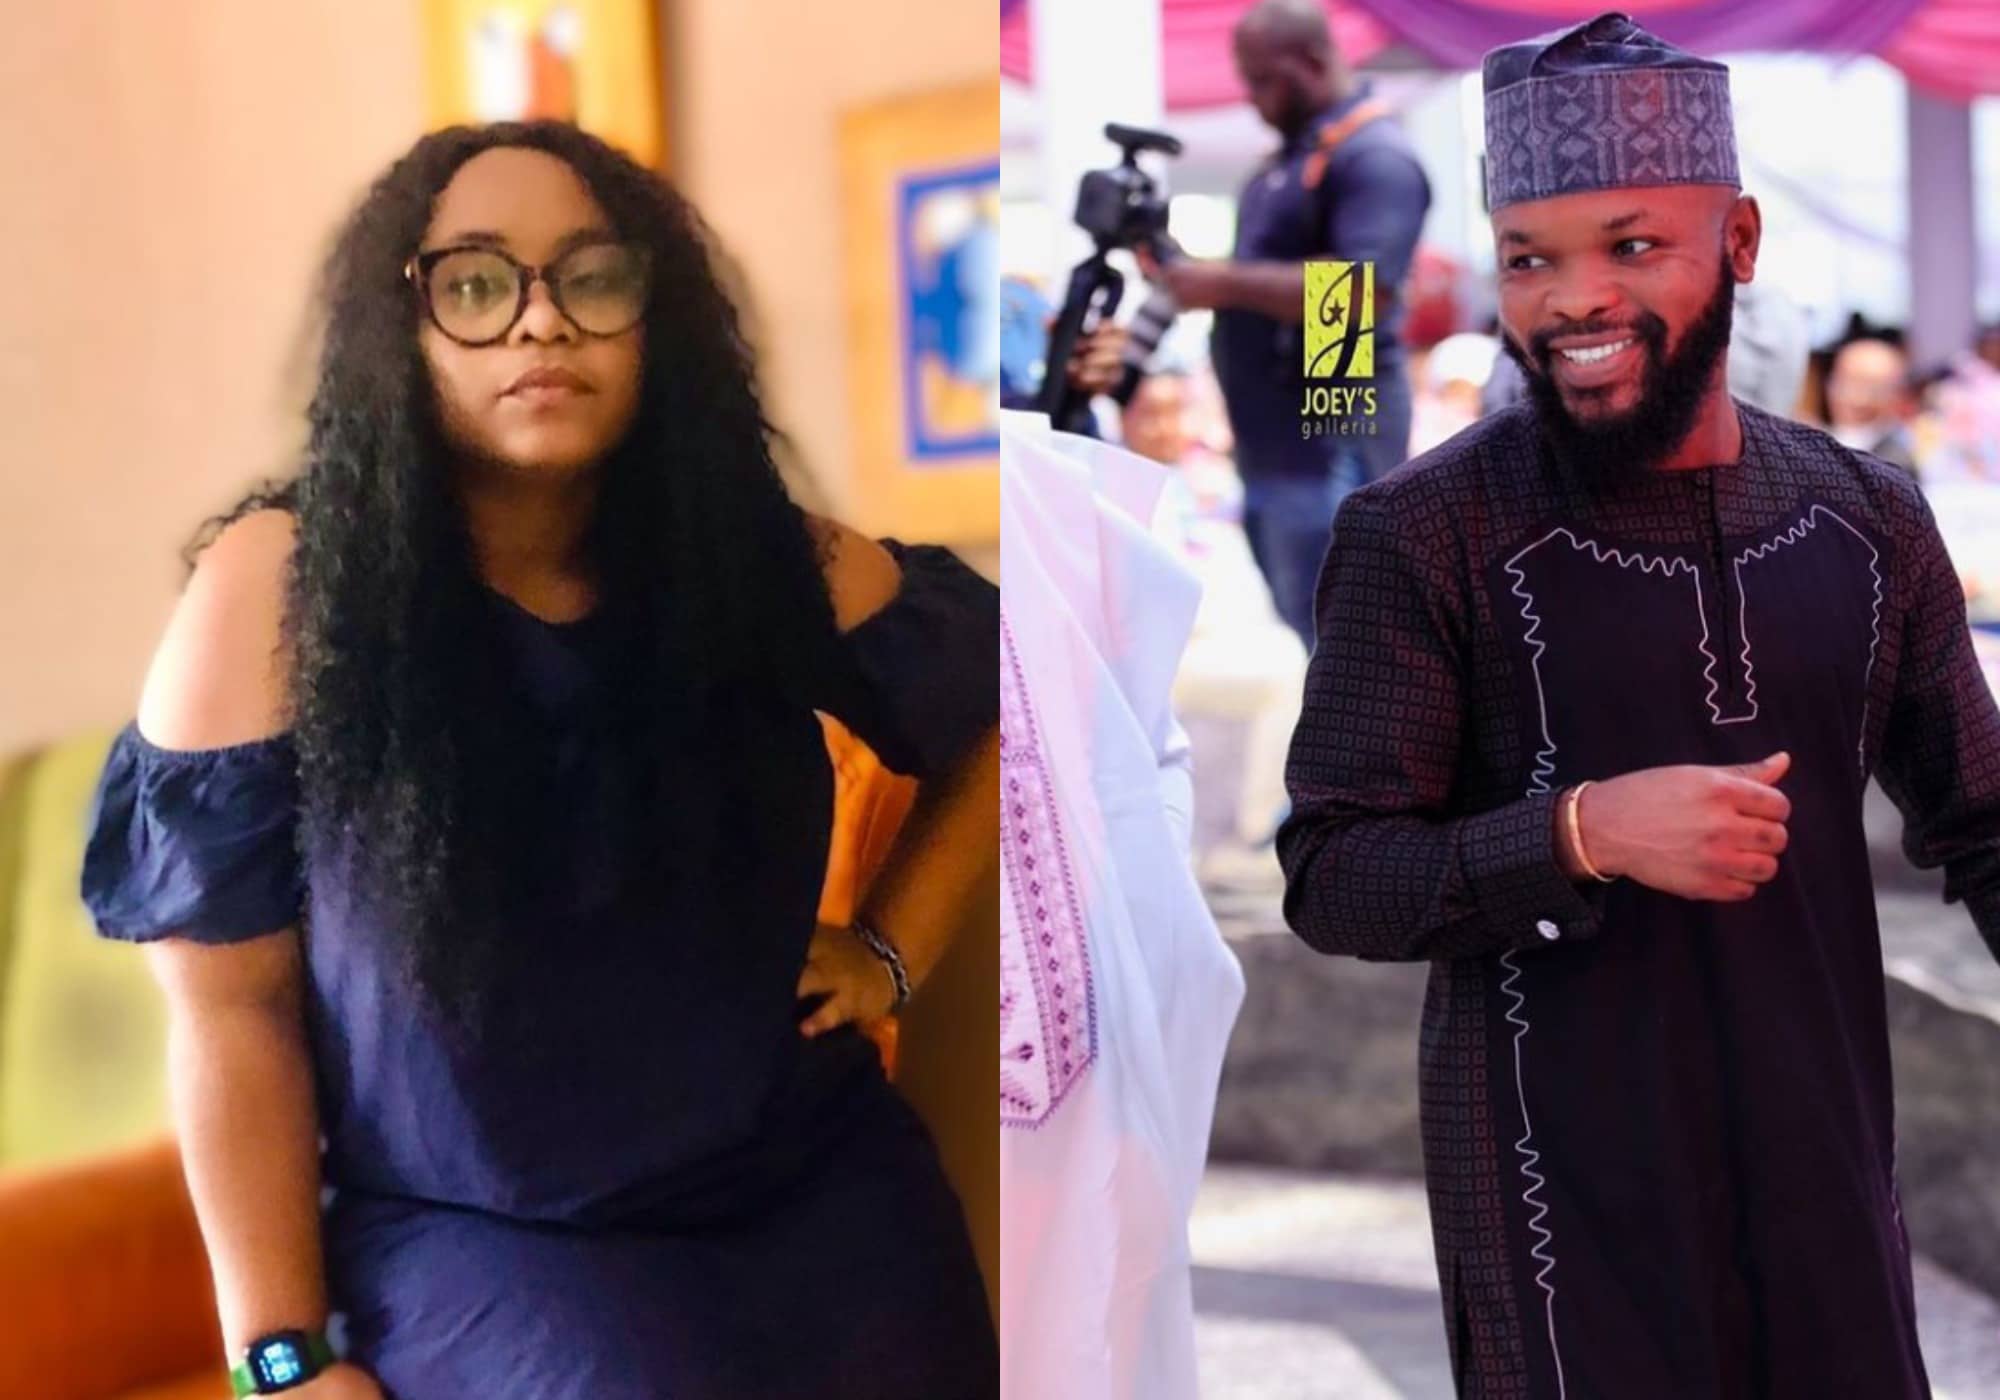 You committed Bigamy, come take care of your daughters - Nedu Wazobia's  ex-wife fires back - KFN